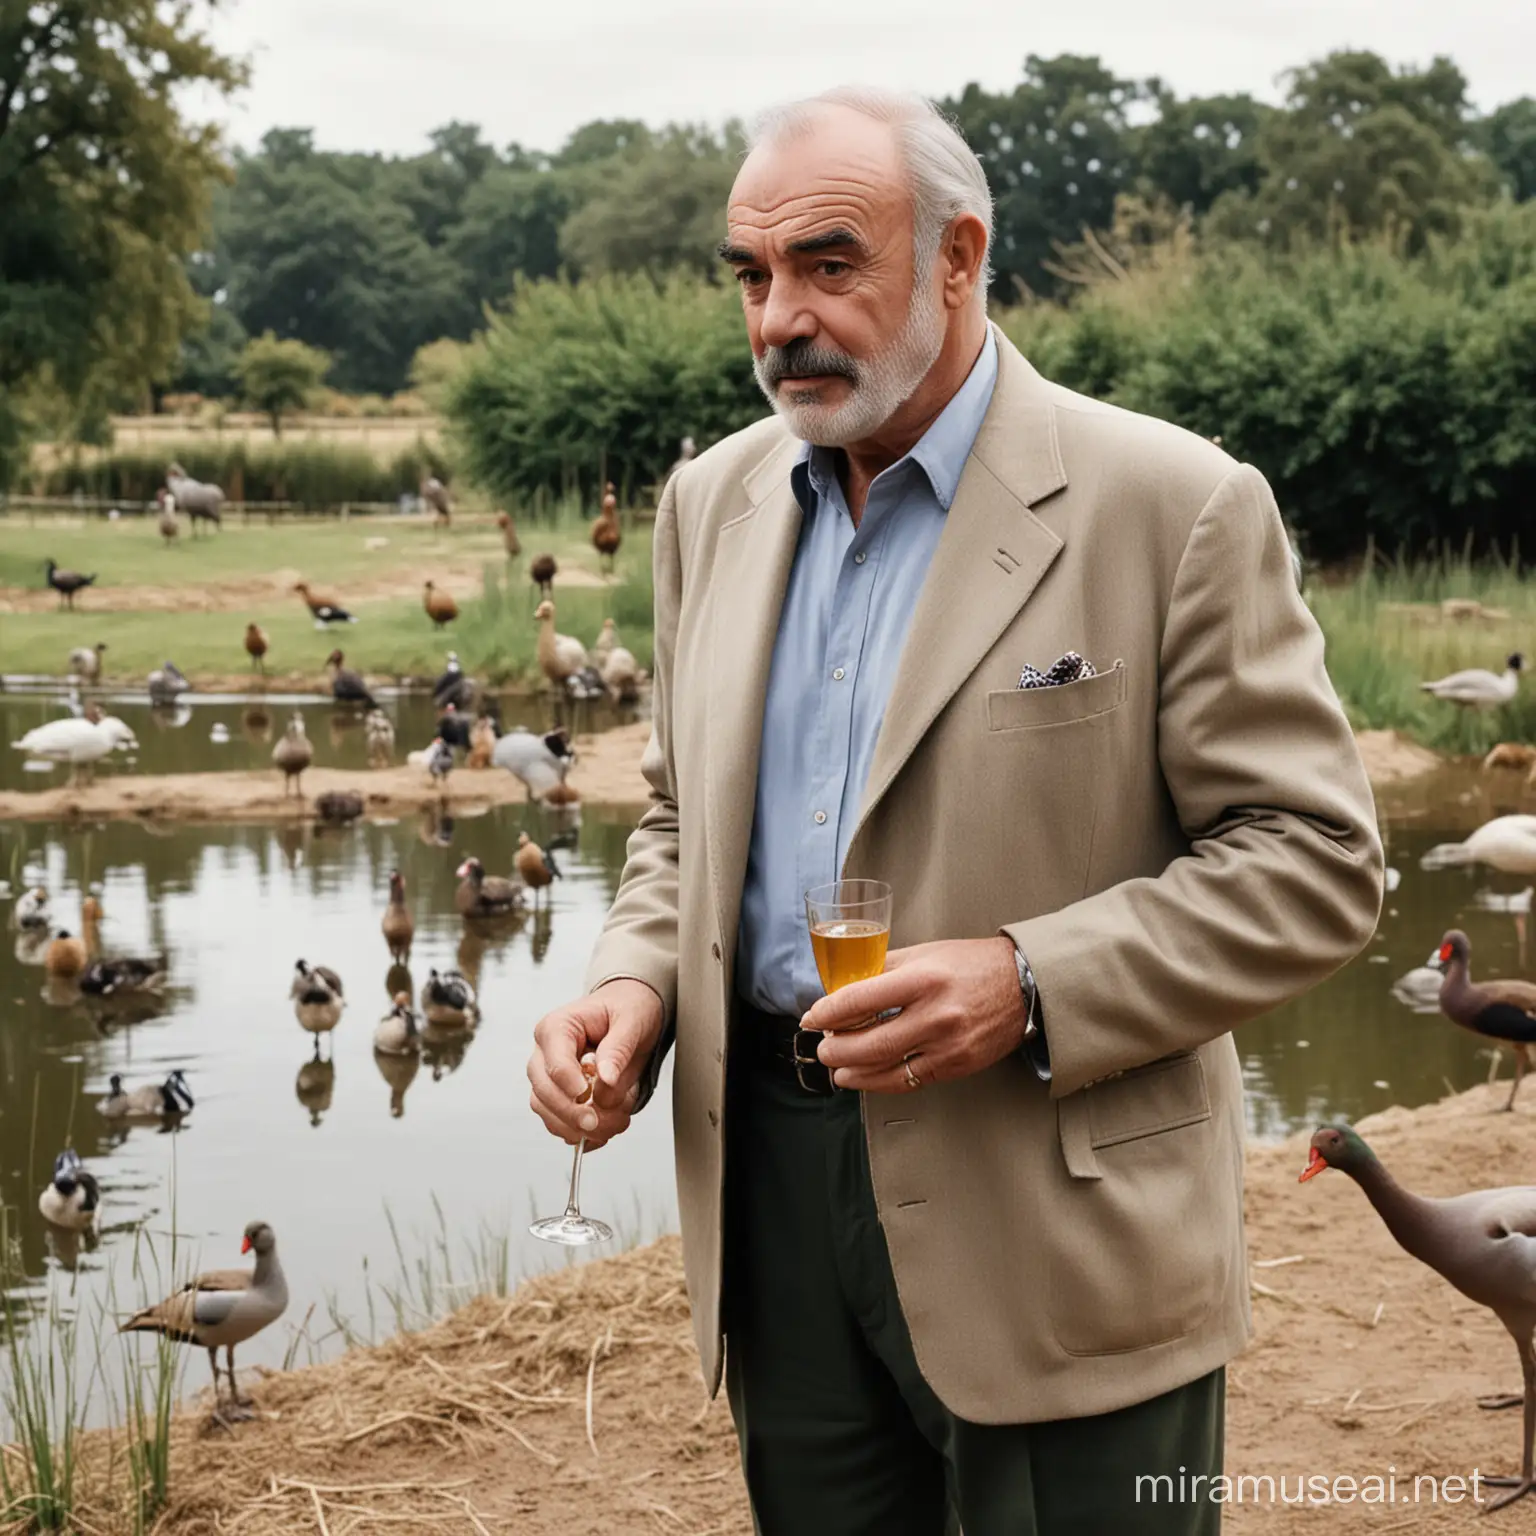 Sean Connery wandering around a wildfowl park with a bottle of scotch